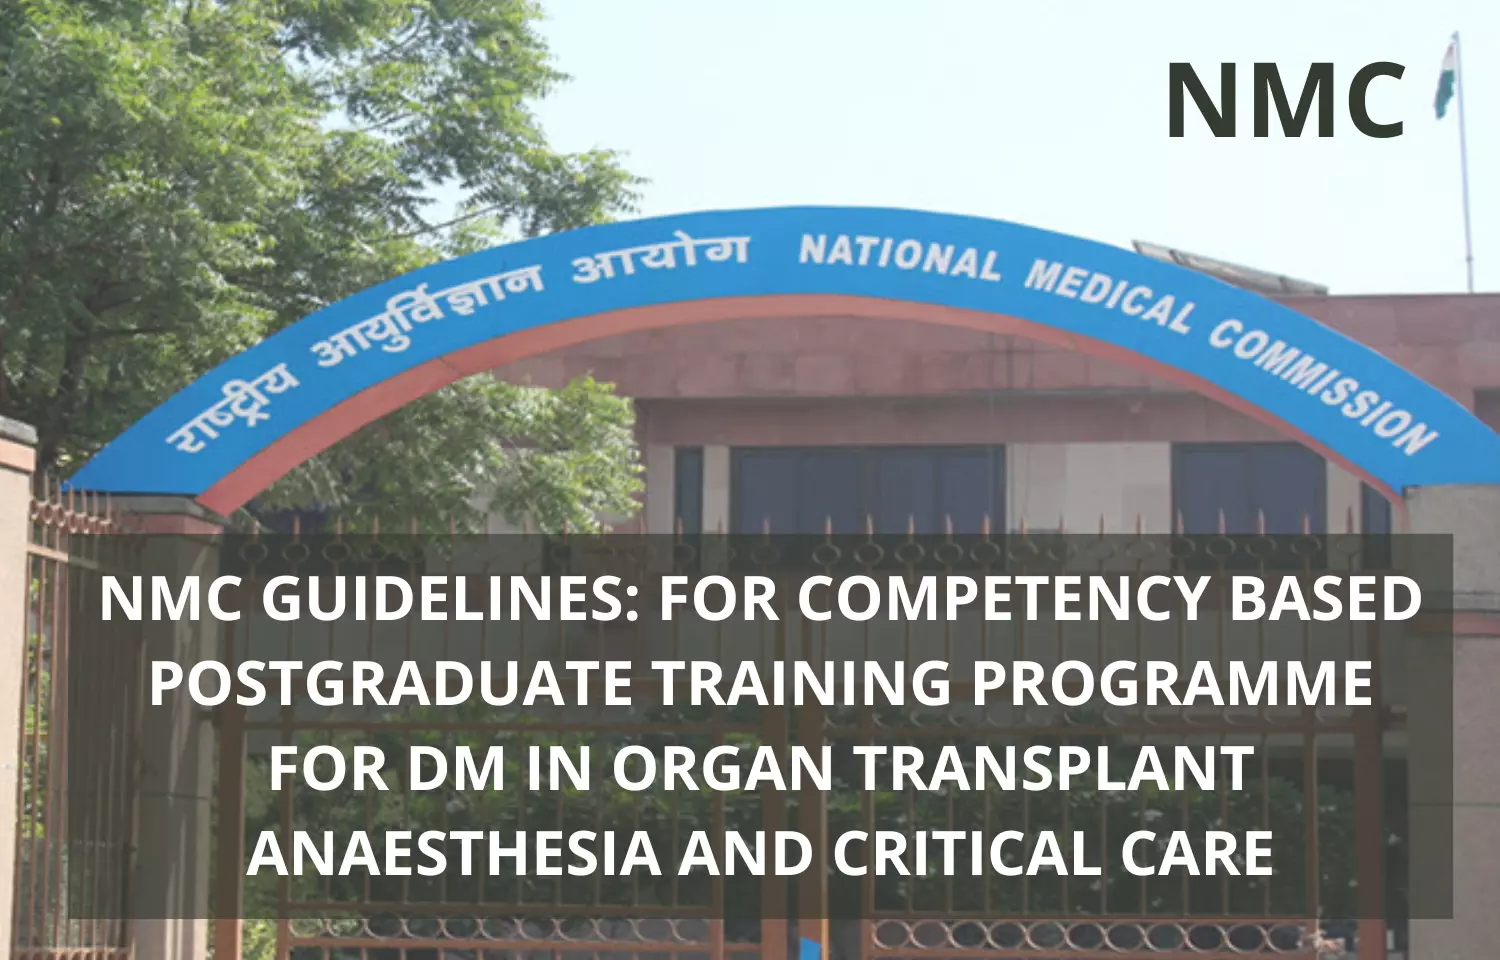 NMC Guidelines For Competency-Based Training Programme For DM Organ Transplant Anaesthesia And Critical Care